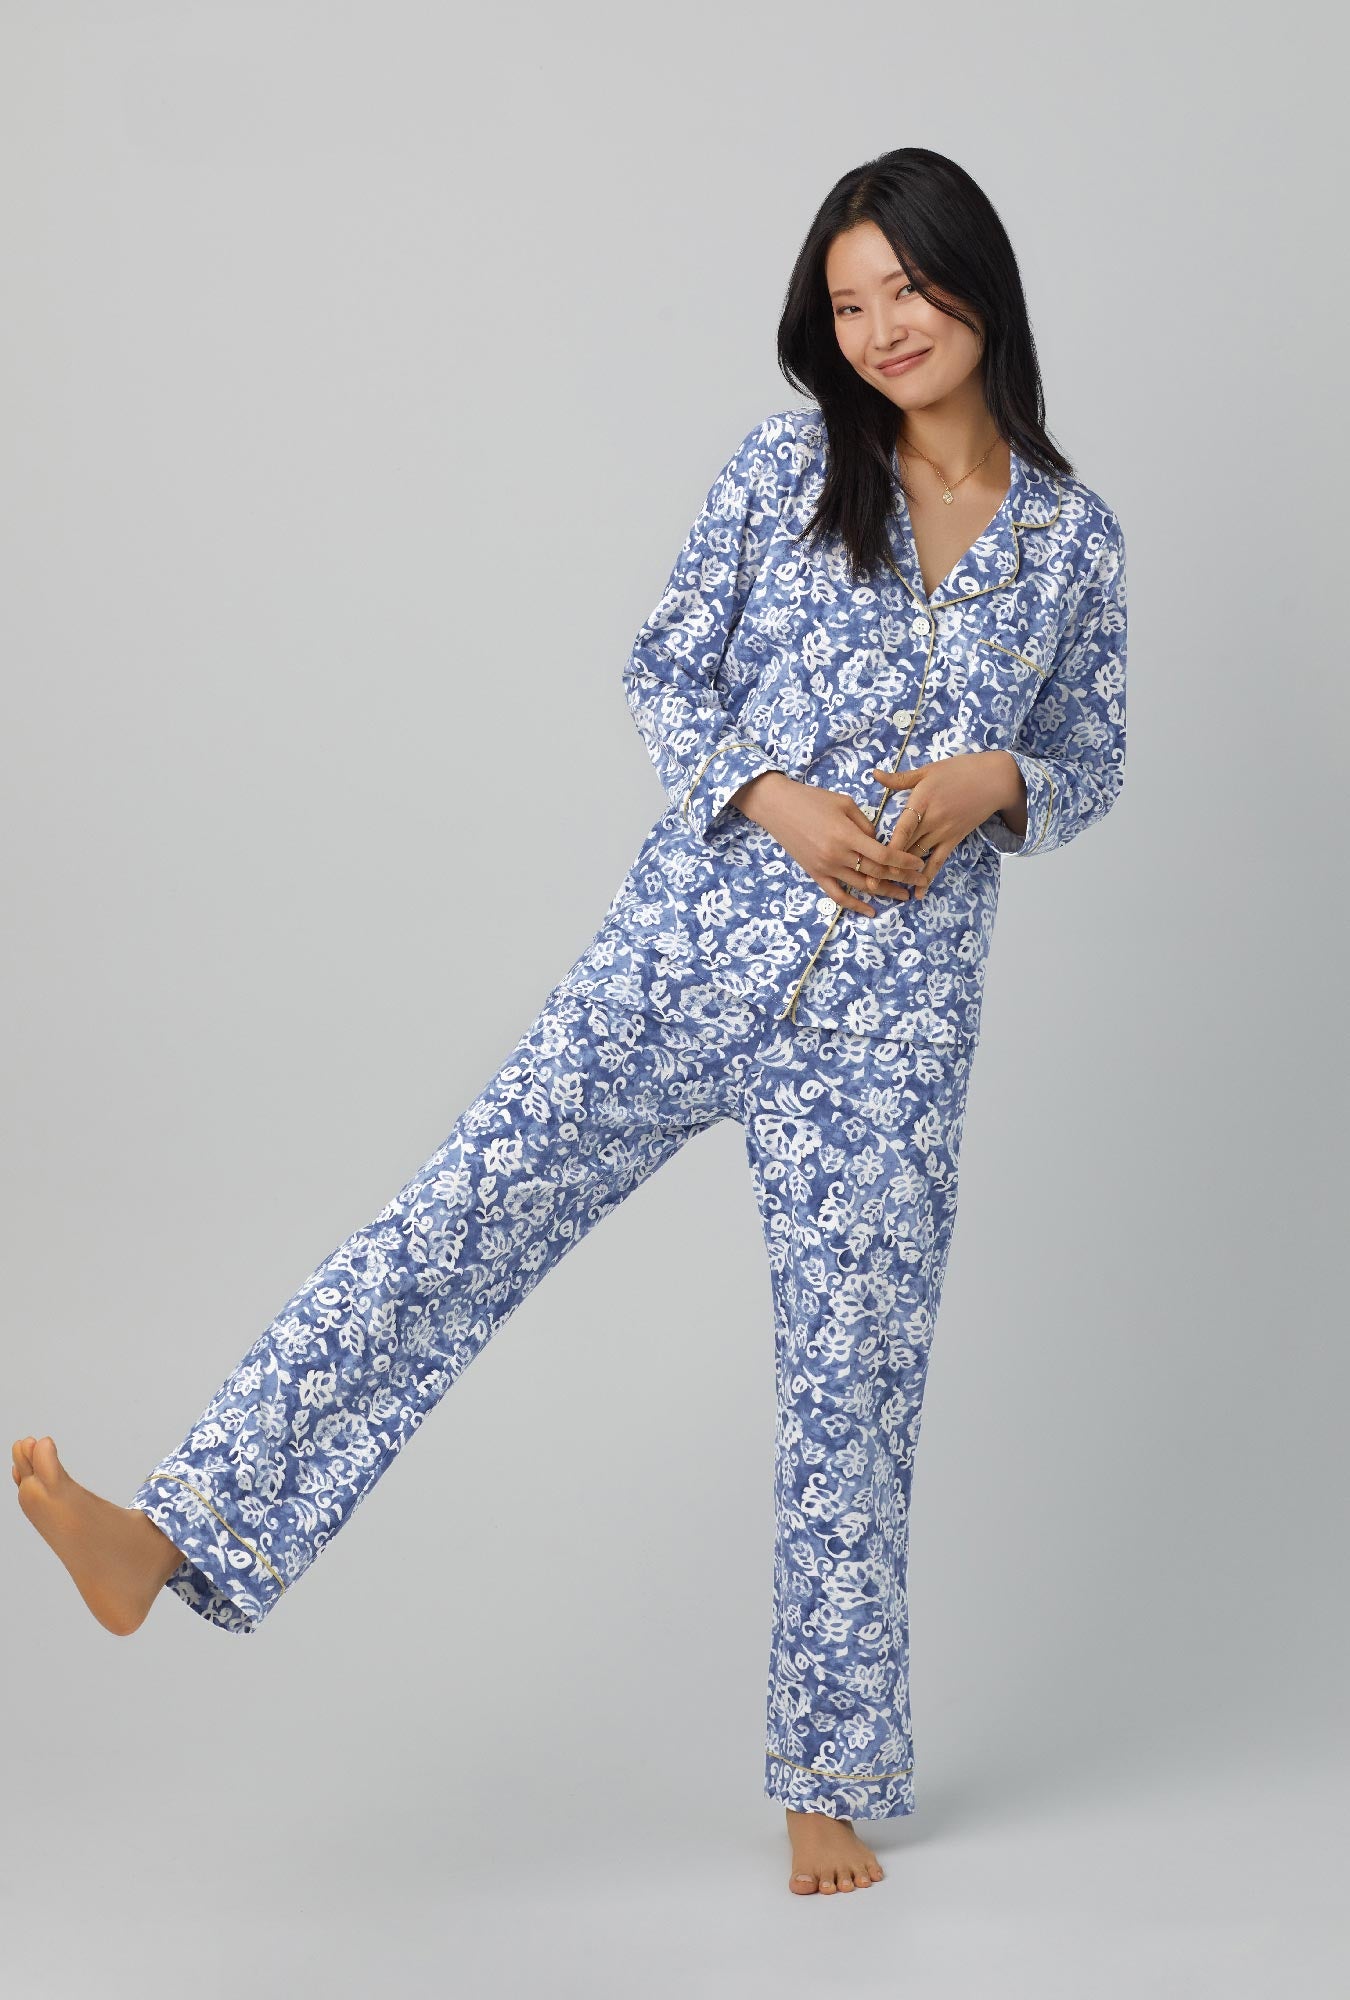 A lady wearing long sleeve classic stretch jersey pj set with autumn eve print